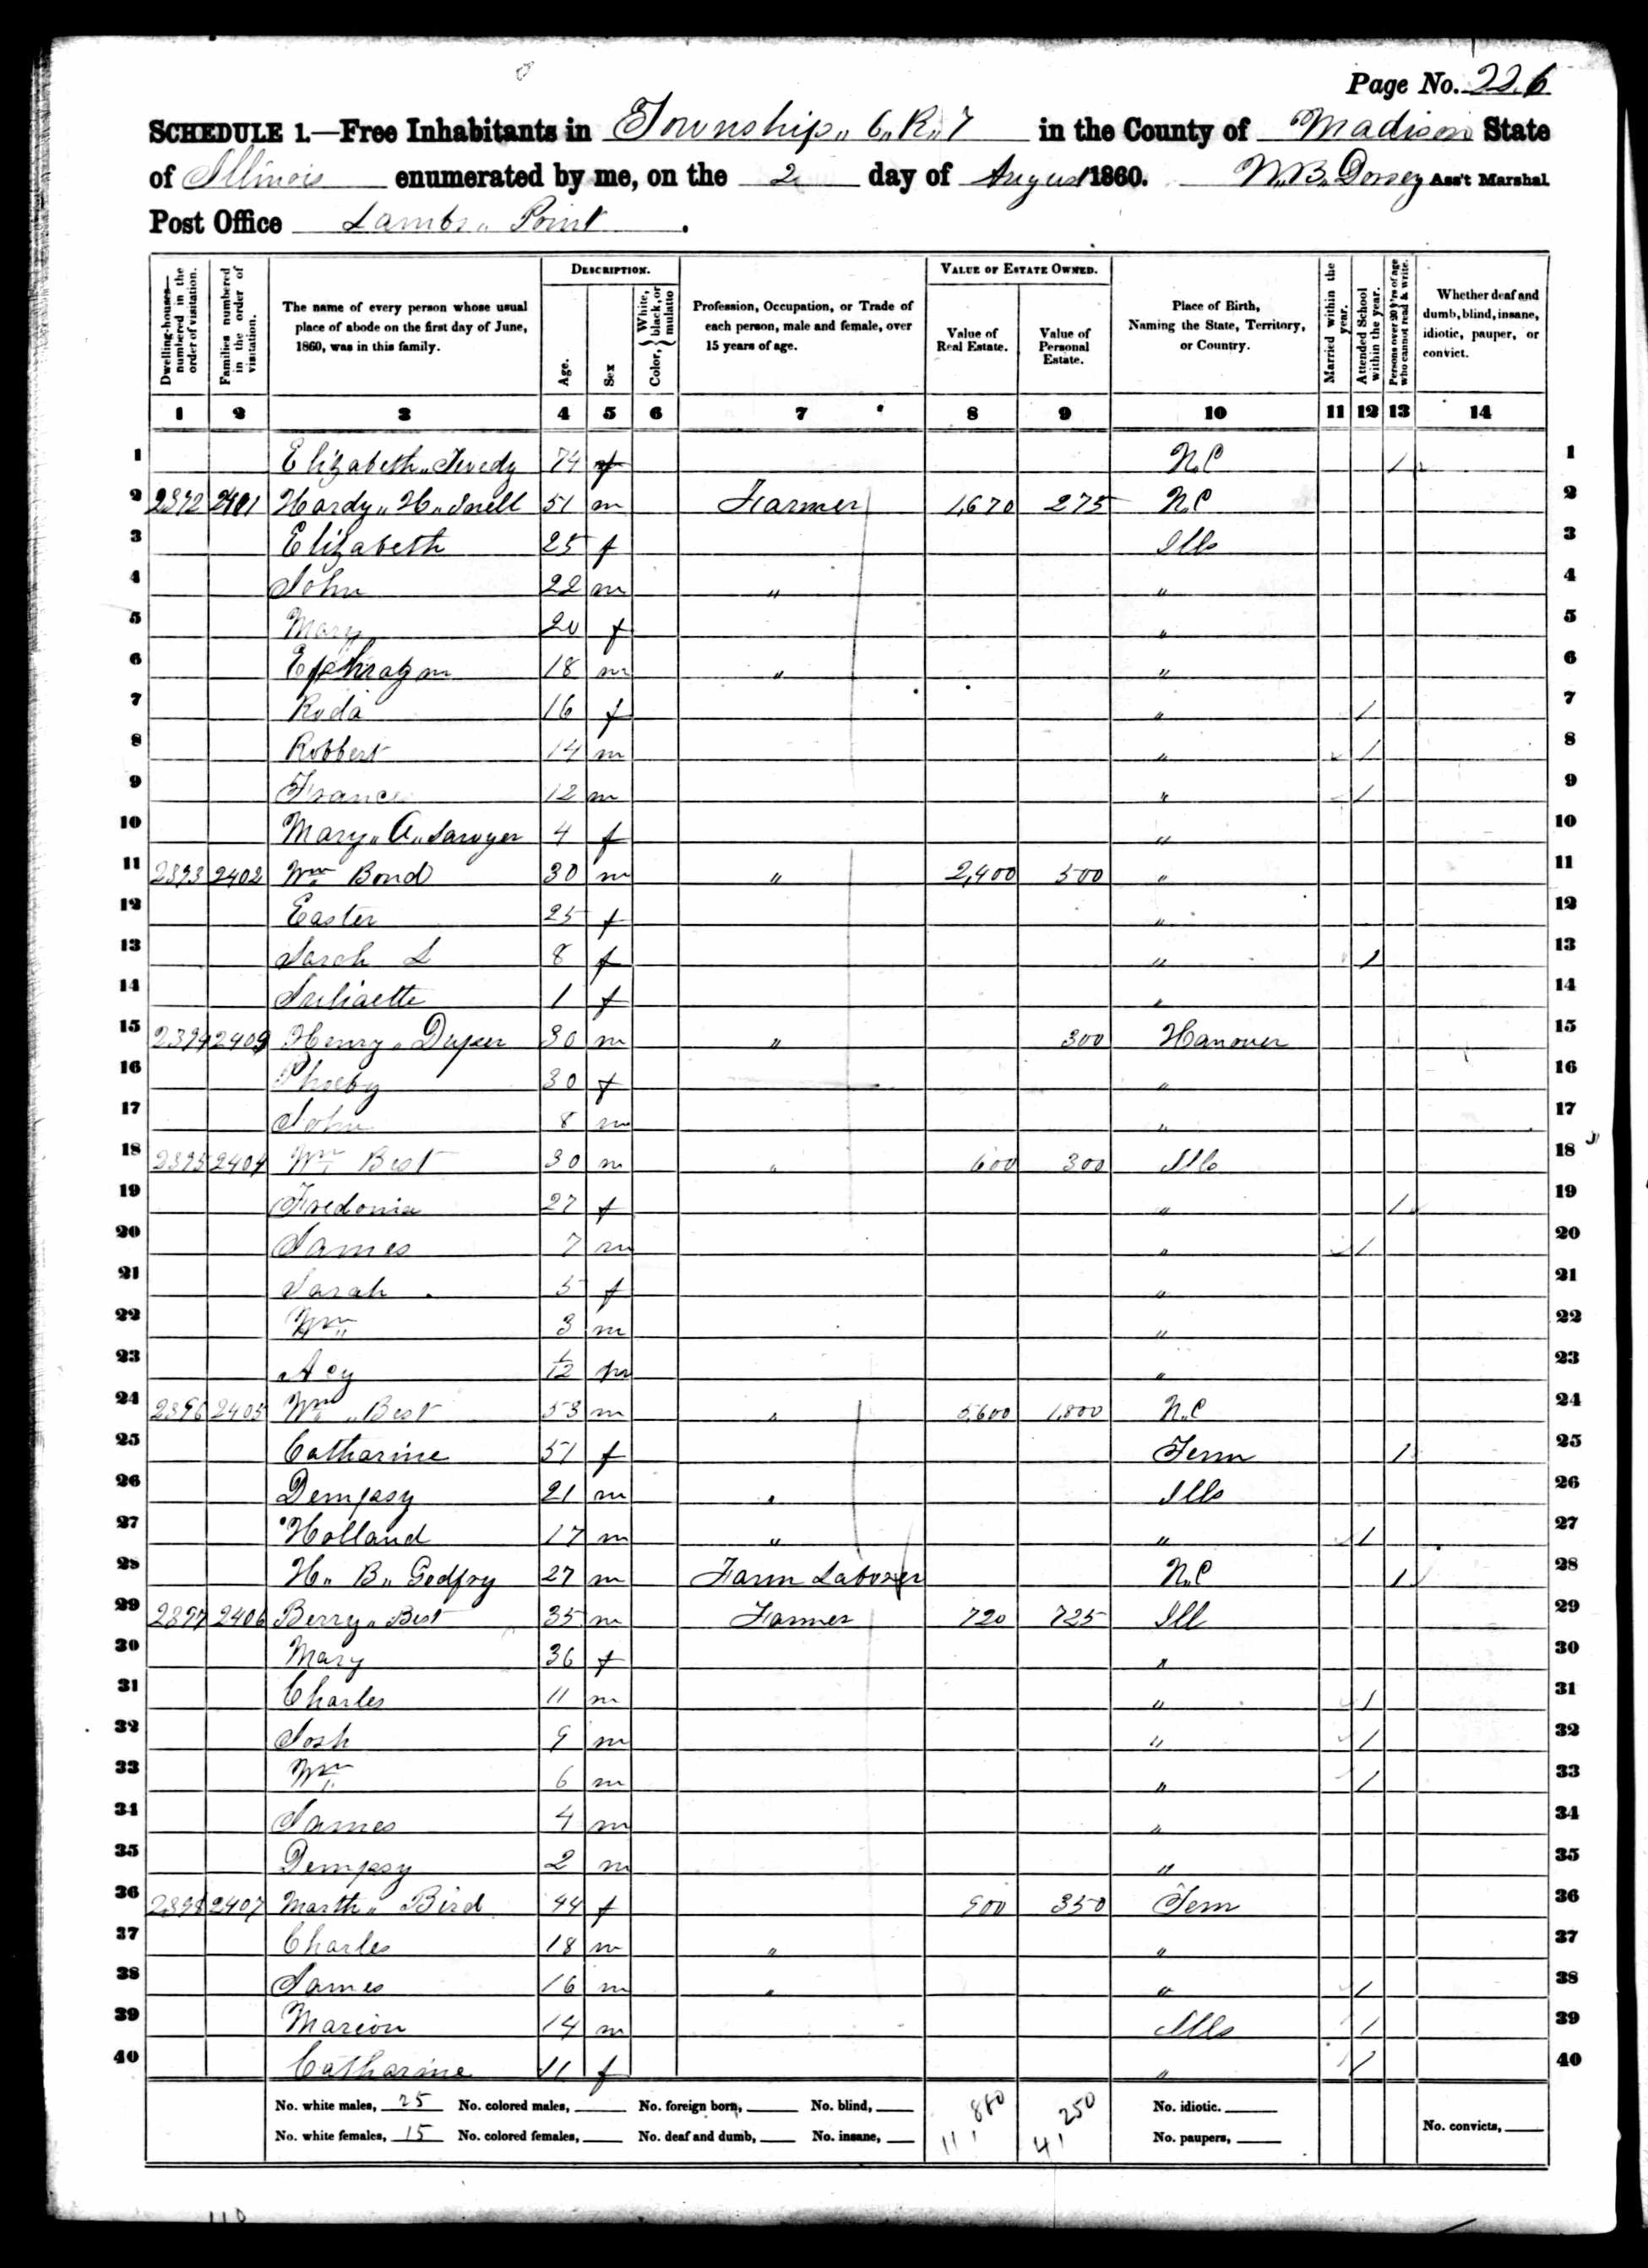 Asberry and Mary M. (Walker) Best, 1860 Madison County, Illinois, census